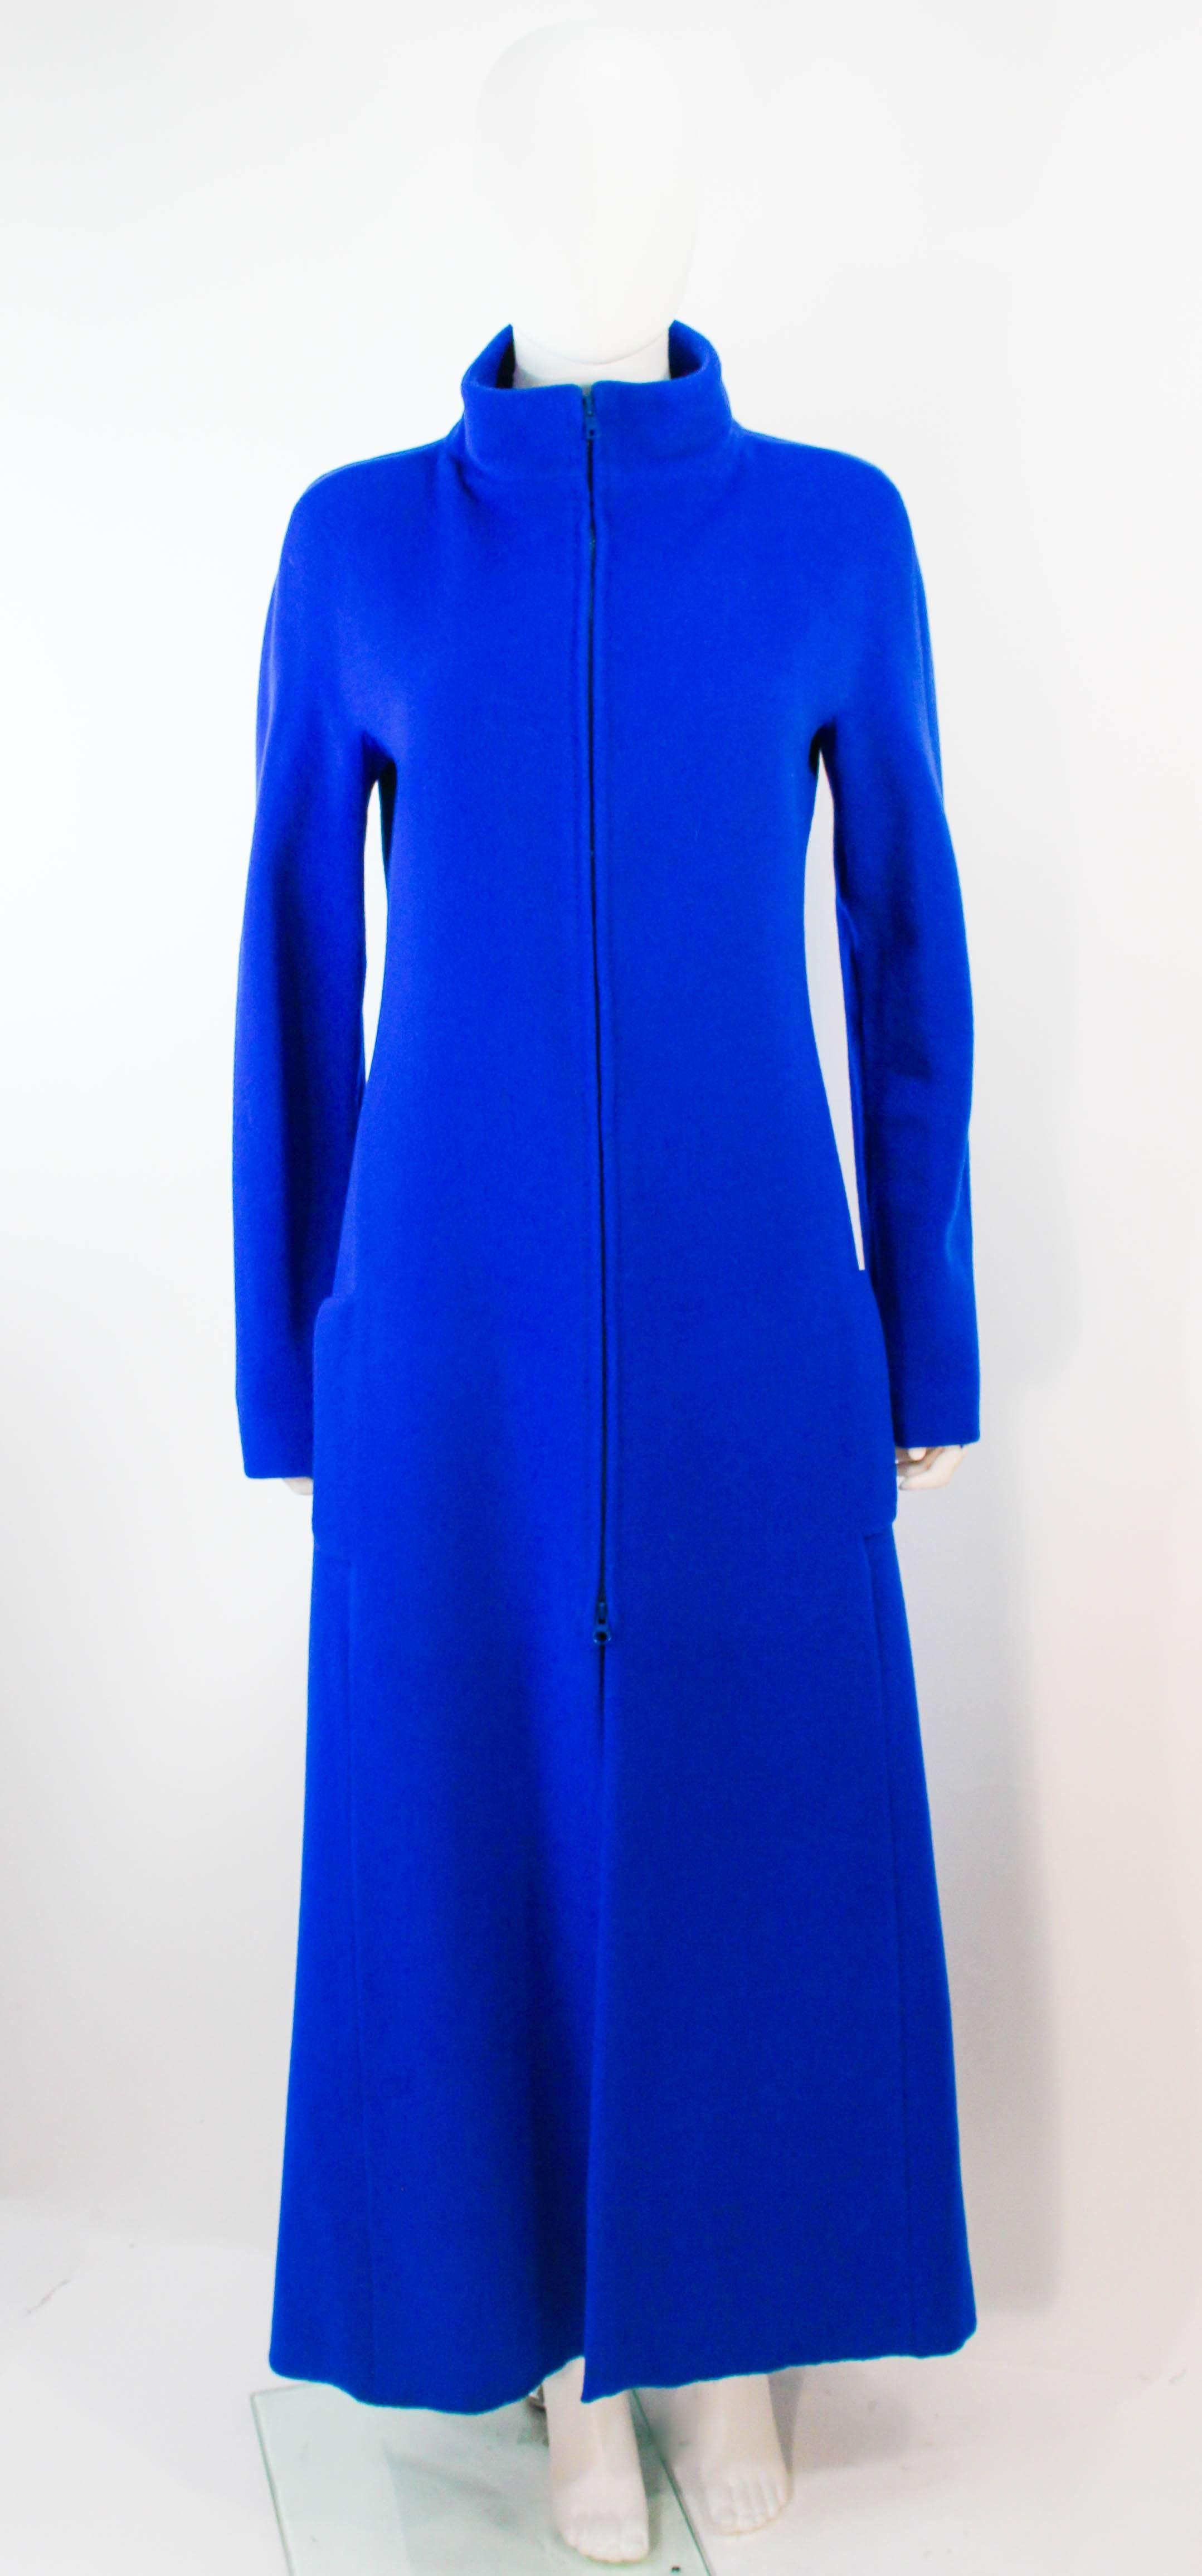 This Krizia design is composed of a rich royal blue wool. Features a center front double ended zipper with side pockets. In excellent vintage condition, some small moth hole throughout.

**Please cross-reference measurements for personal accuracy.